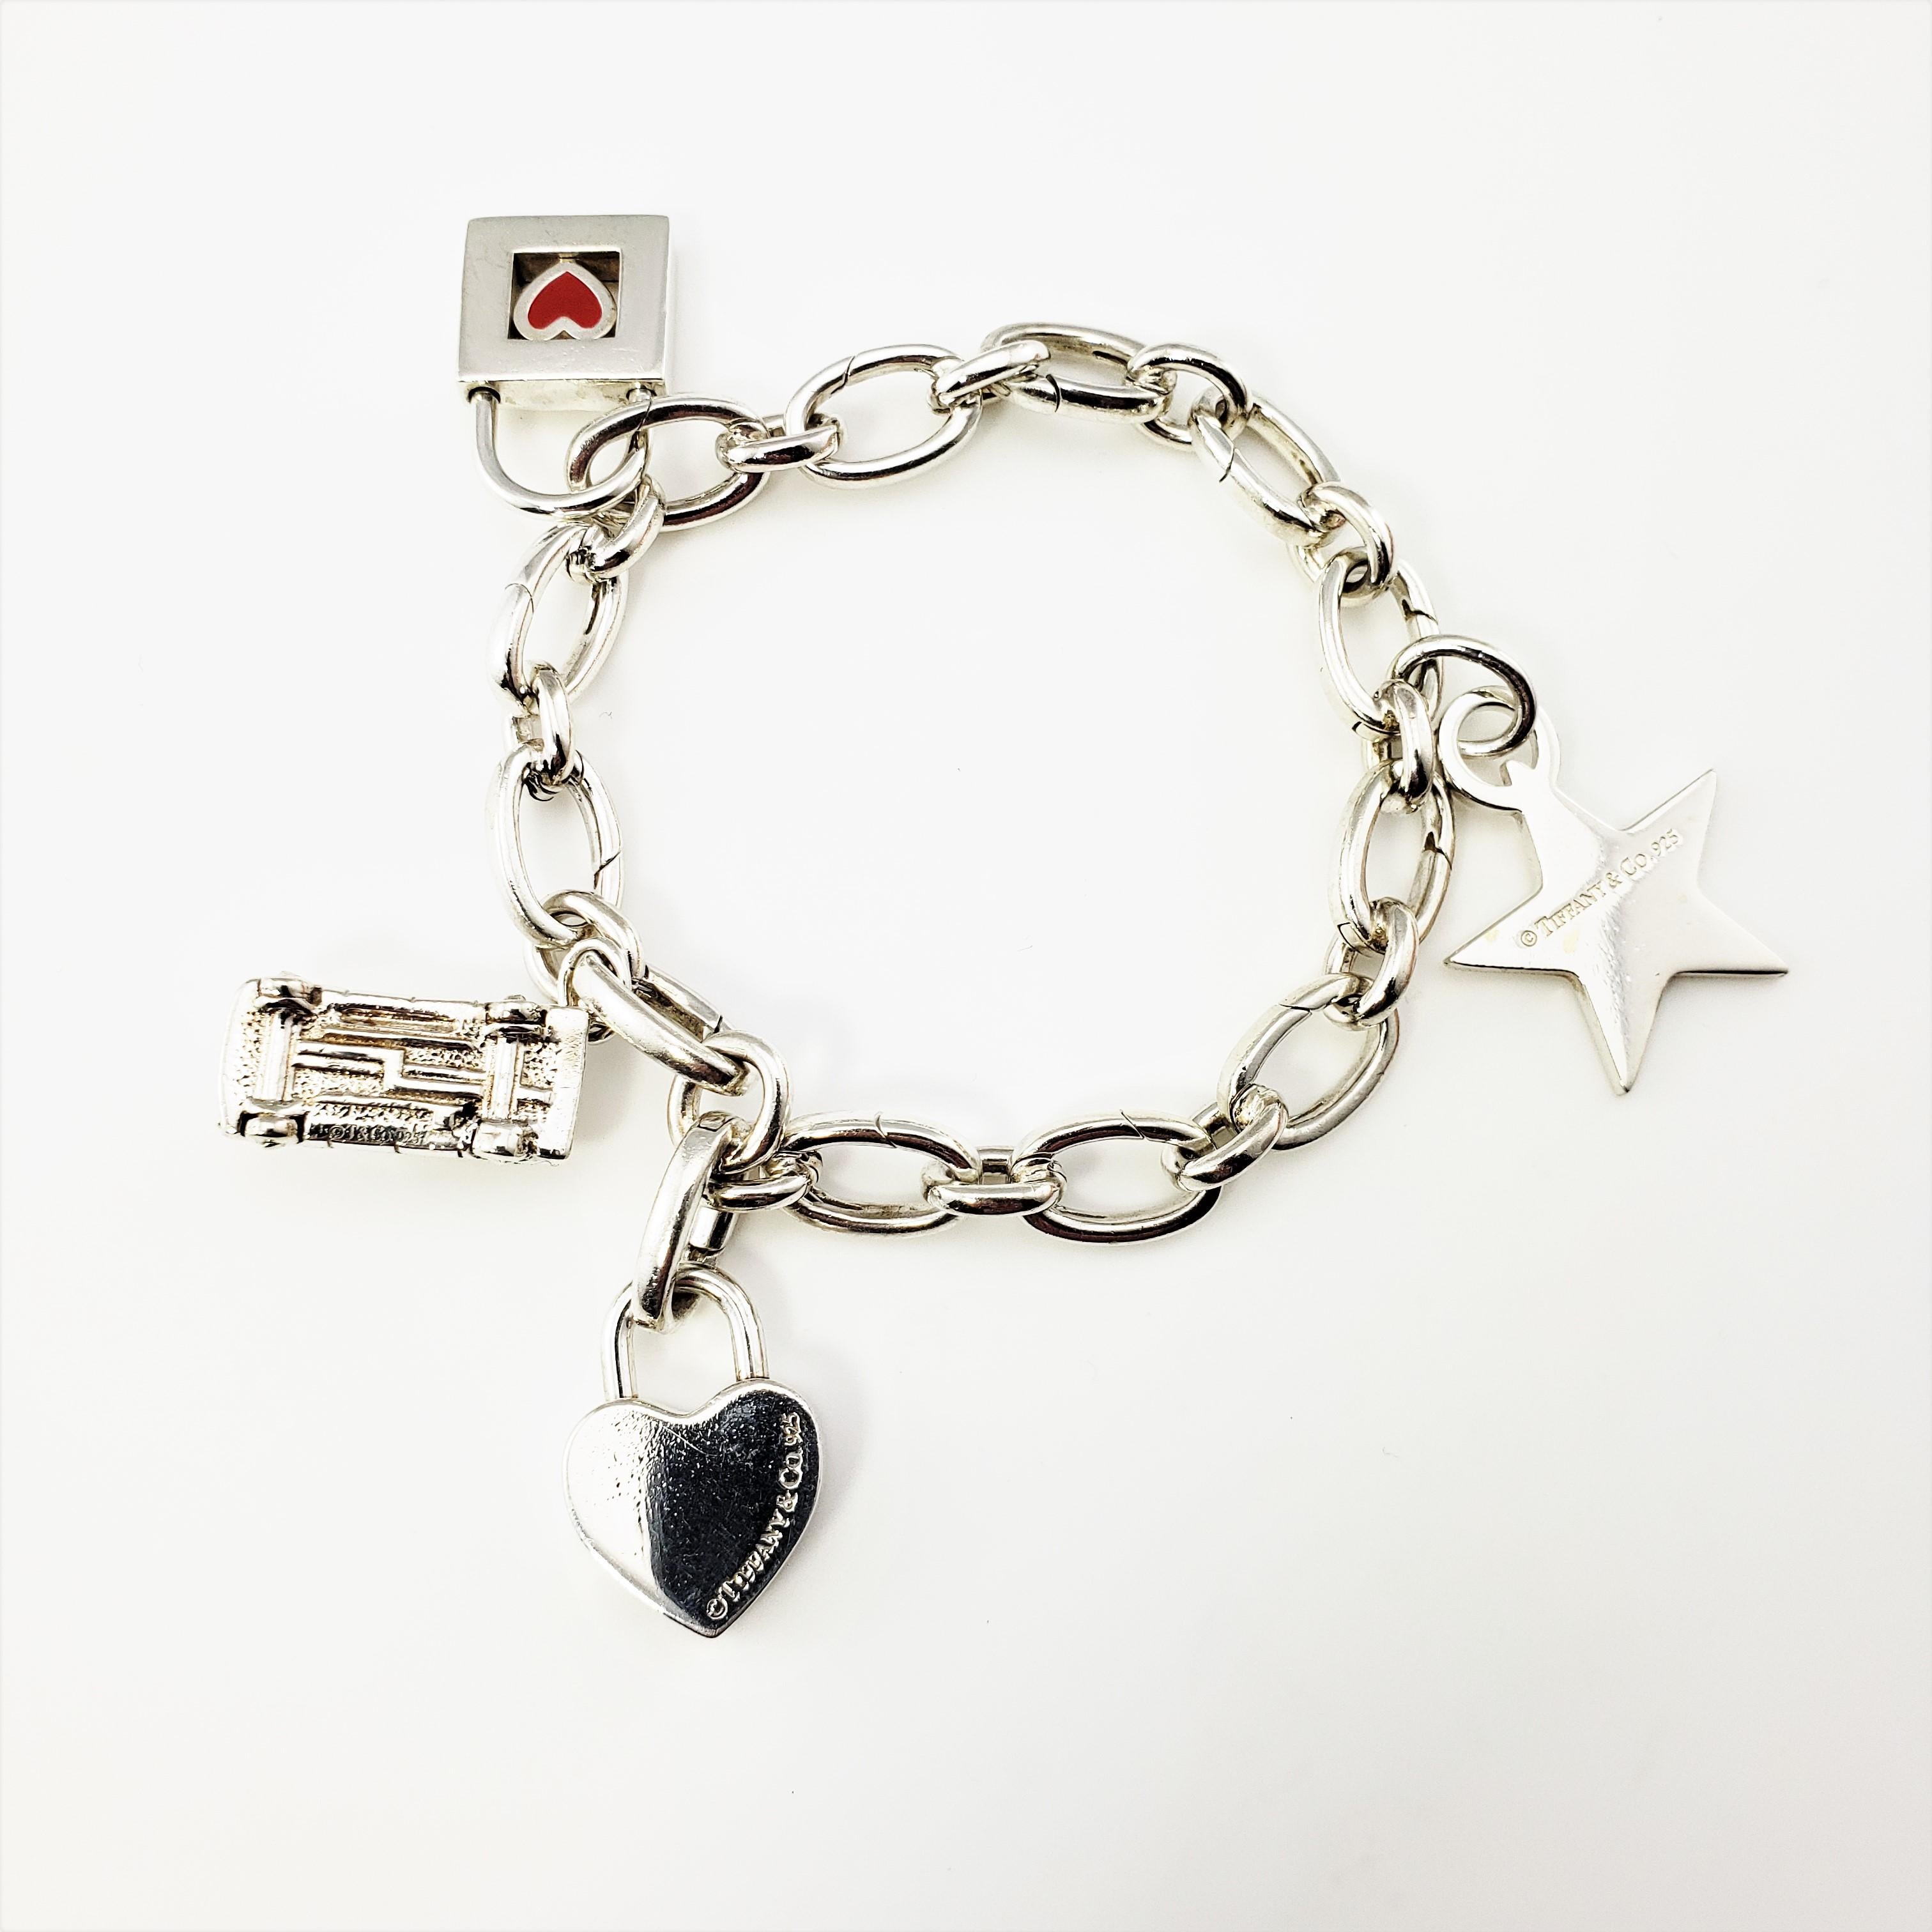 Vintage Tiffany and Co. Sterling Silver Charm Bracelet

This lovely keepsake features four charms; a star, a heart, a taxicab, and a lock suspended from an elegant link bracelet. Crafted in beautifully detailed sterling silver by Tiffany and